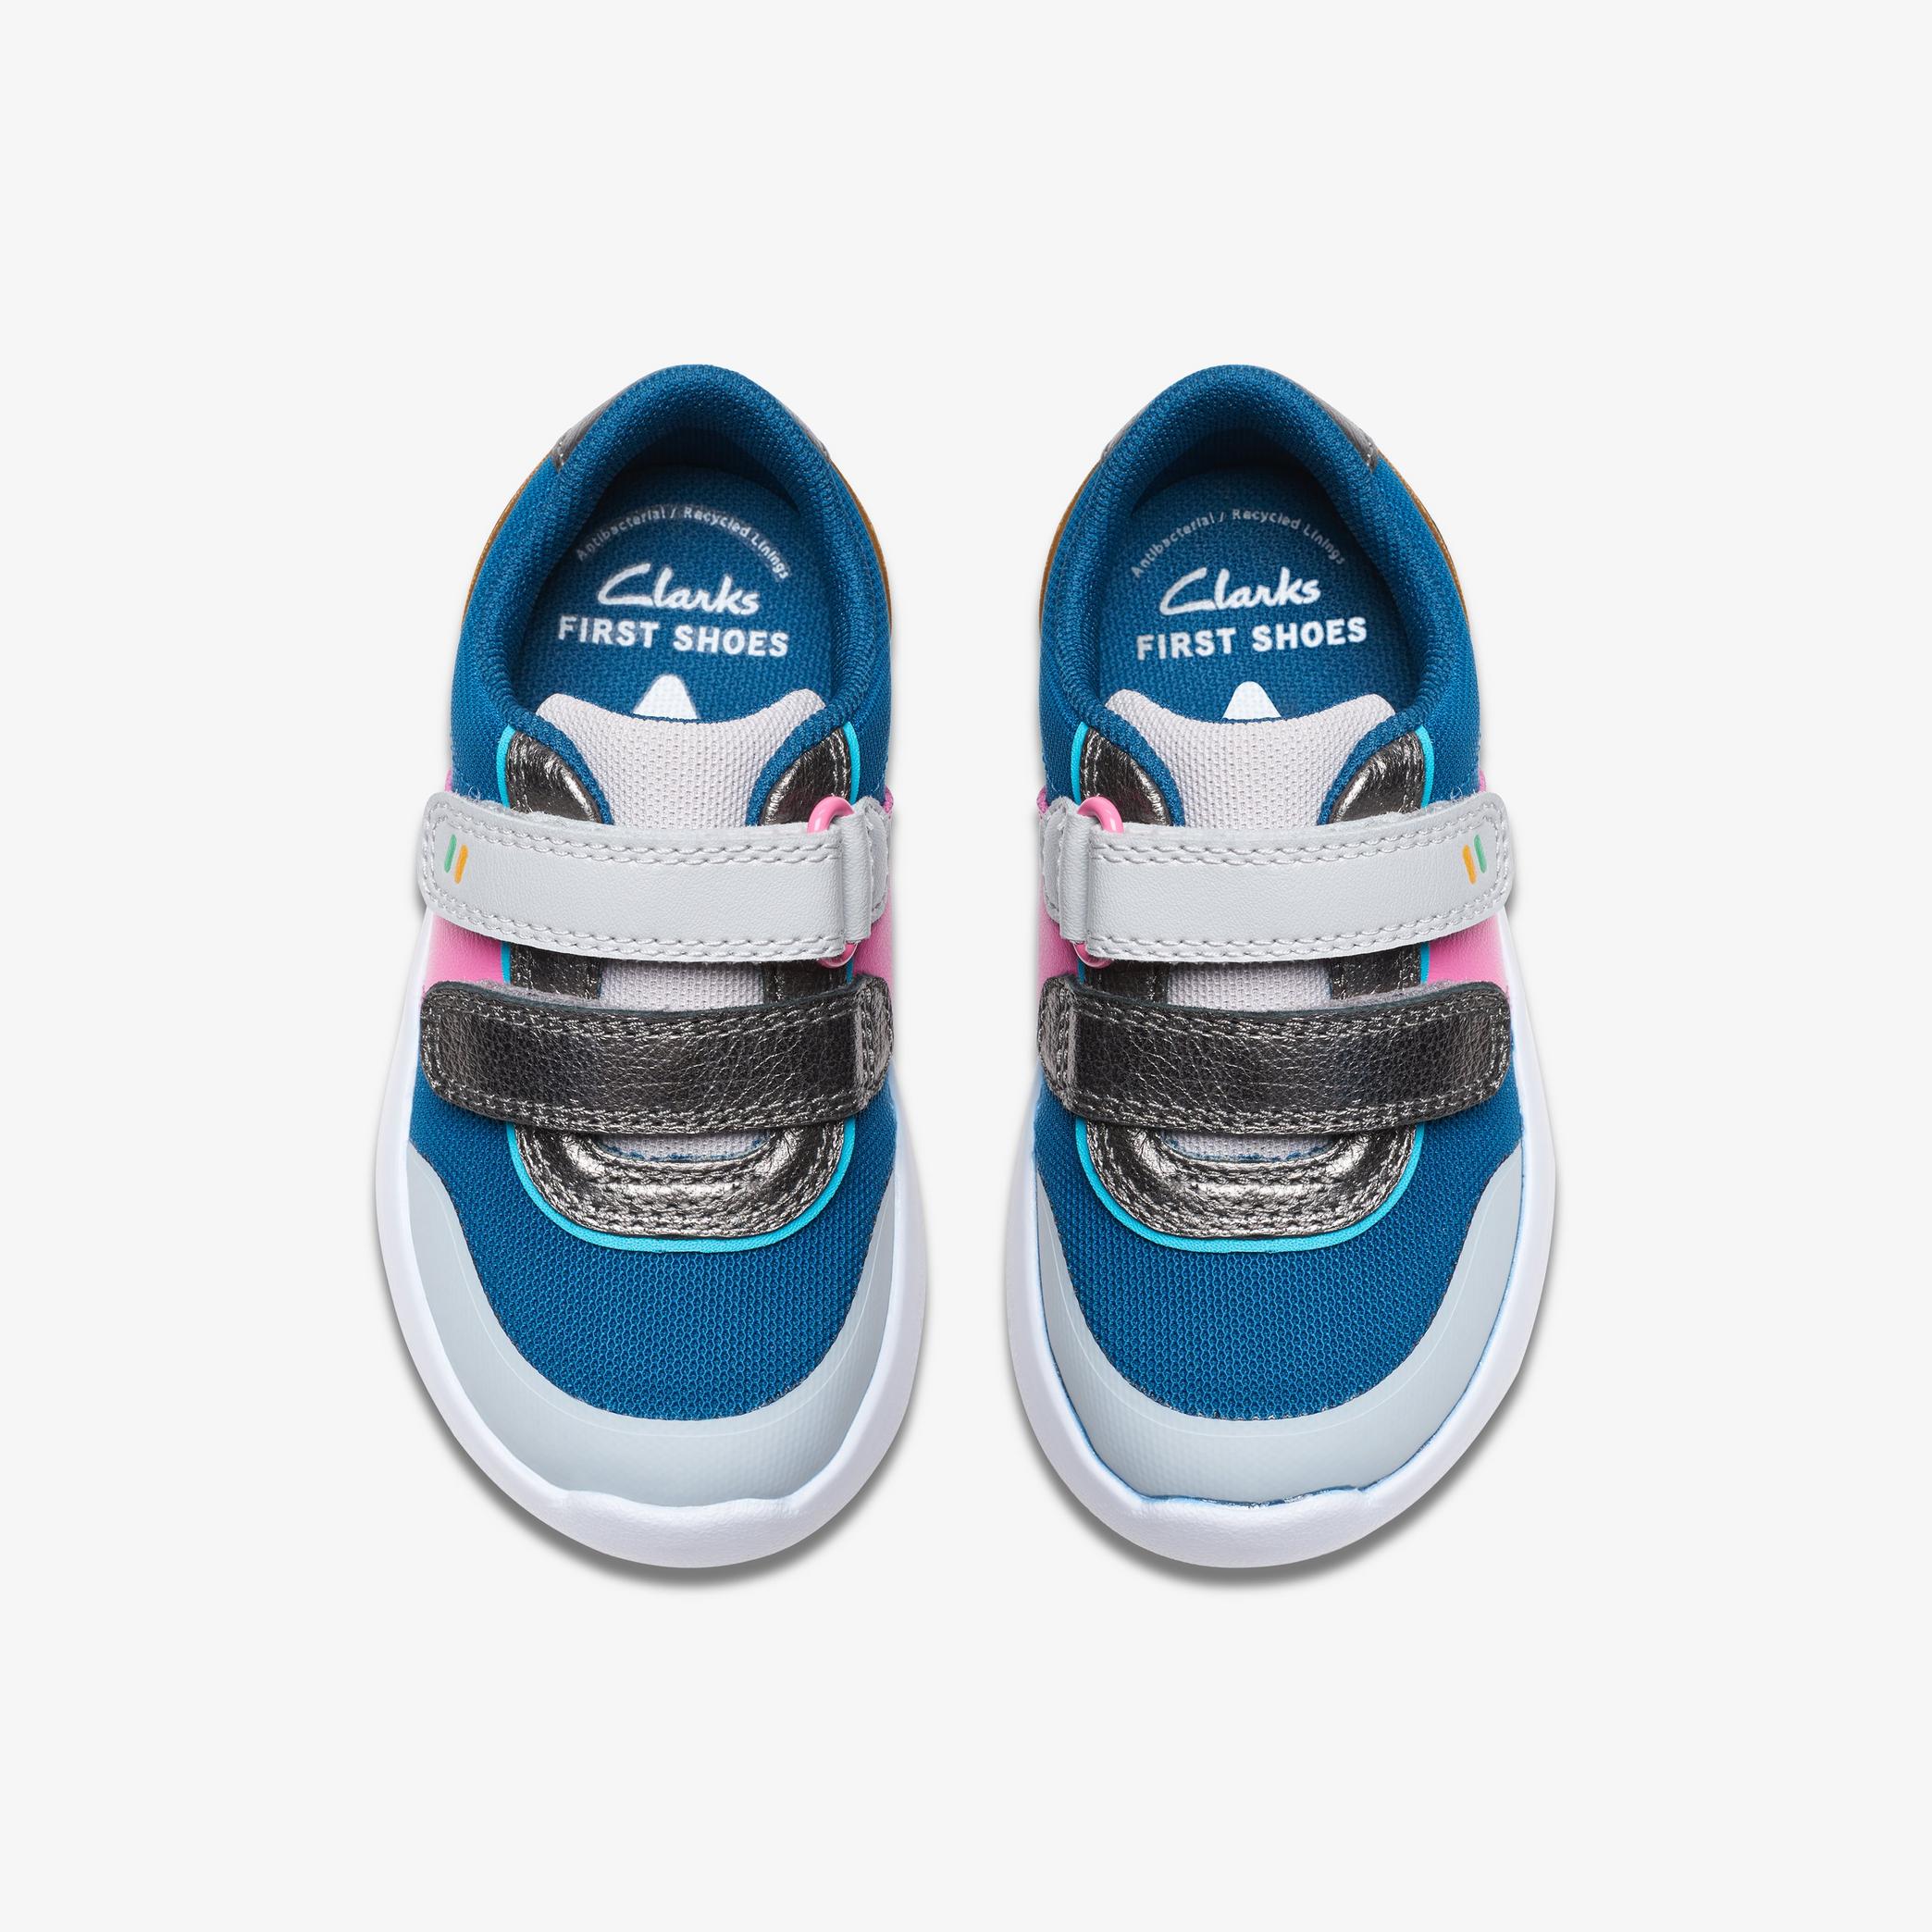 Girls Ath Sphere Toddler Silver Combination Trainers | Clarks UK